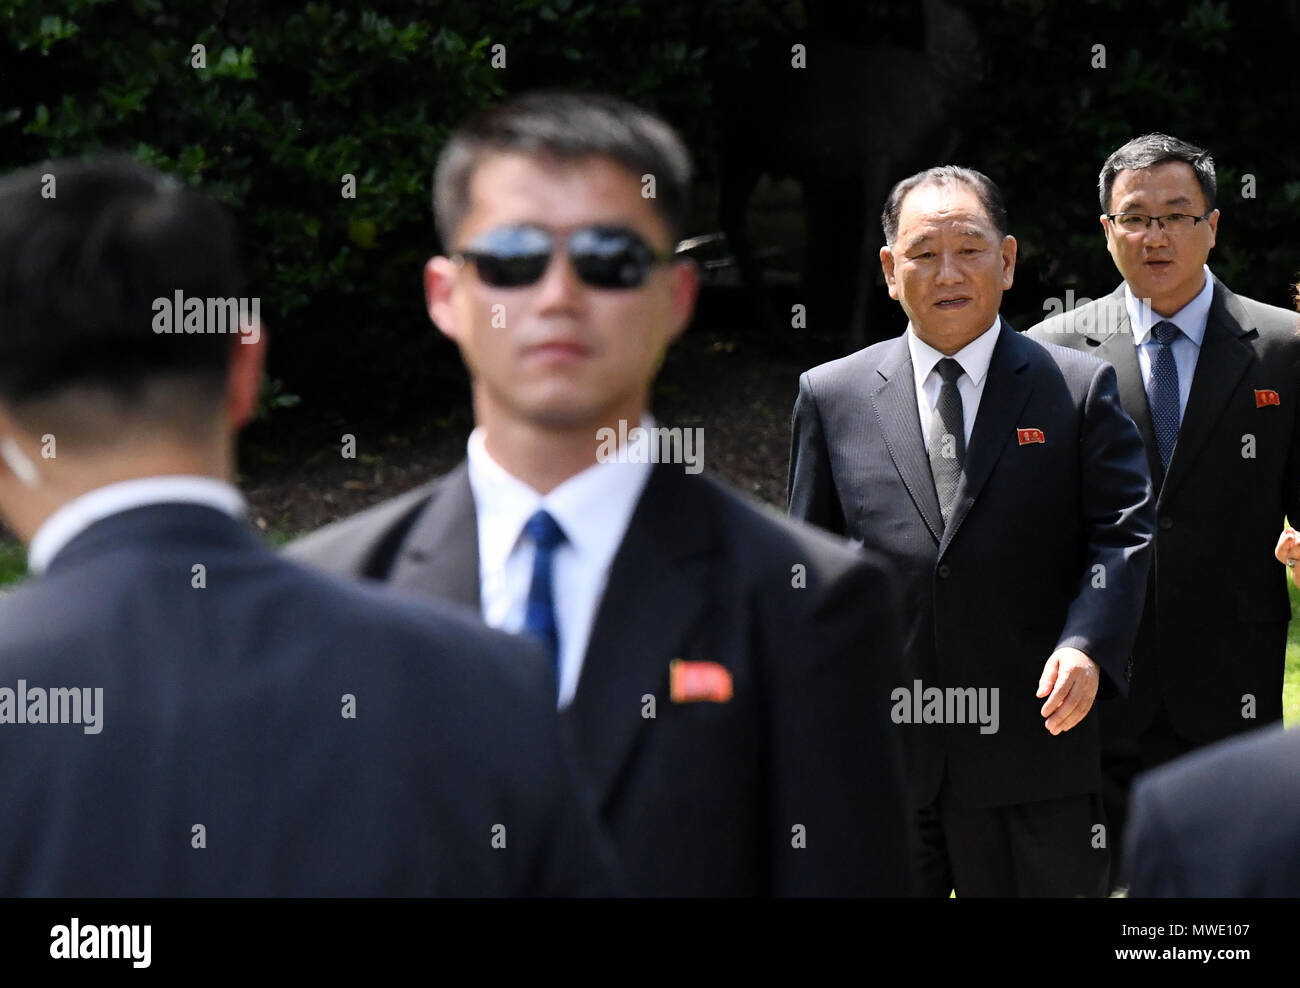 Washington, USA. 1st June 2018. Kim Yong Chol ( 2-R) former North Korean military intelligence chief and one of leader Kim Jong Un's closest aides, departs the White House in Washington on Friday, June 1, 2018. Credit: Olivier Douliery/Pool via CNP /MediaPunch Credit: MediaPunch Inc/Alamy Live News Stock Photo